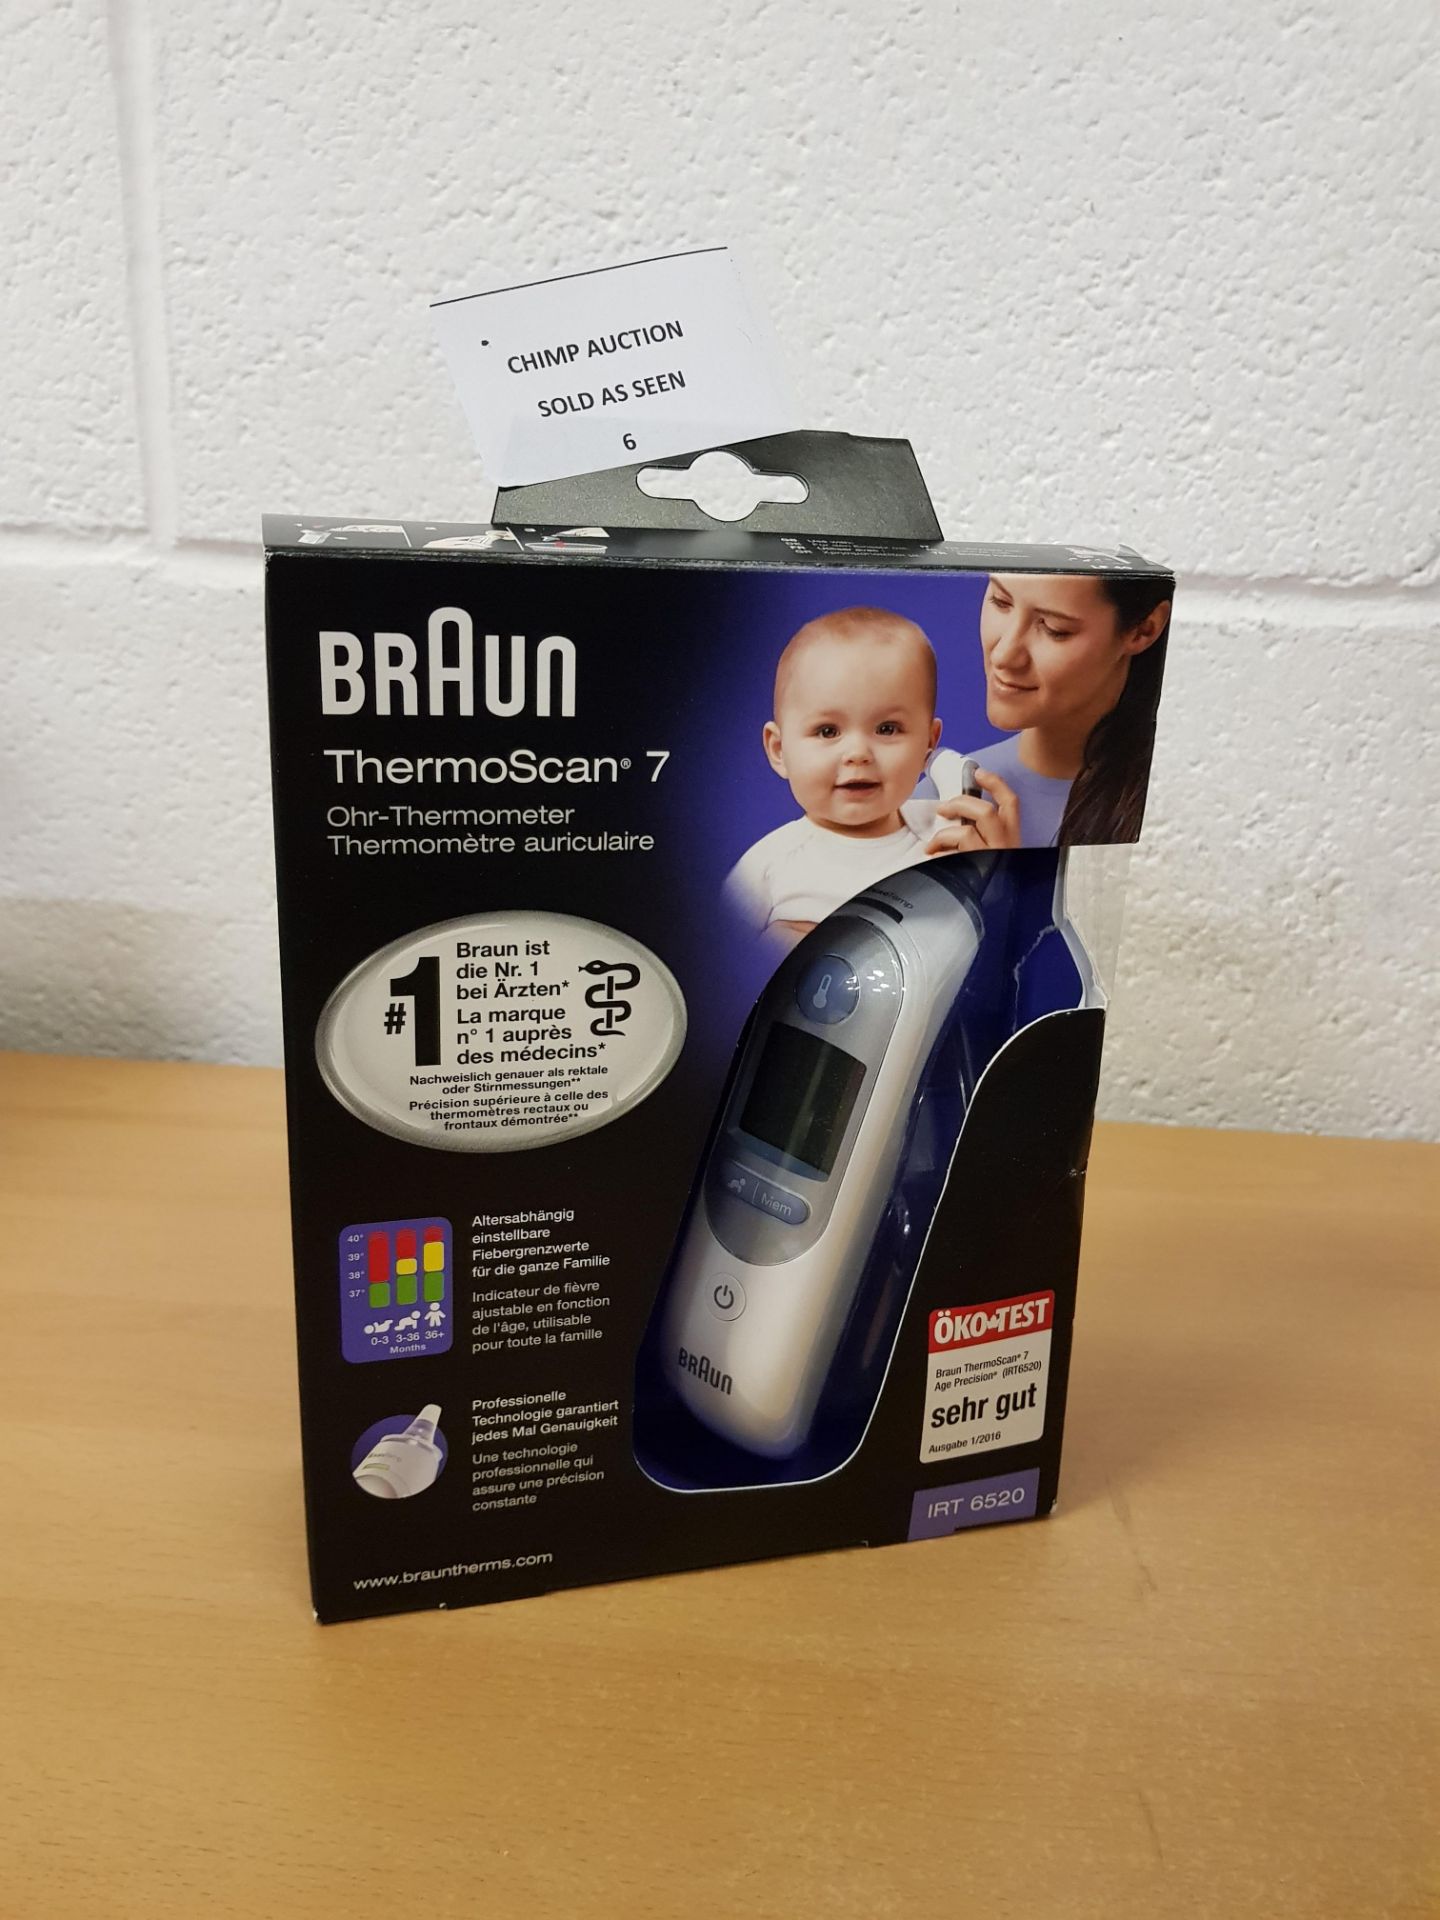 Braun Thermoscan 7 IRT6520 Thermometer RRP £54.99.